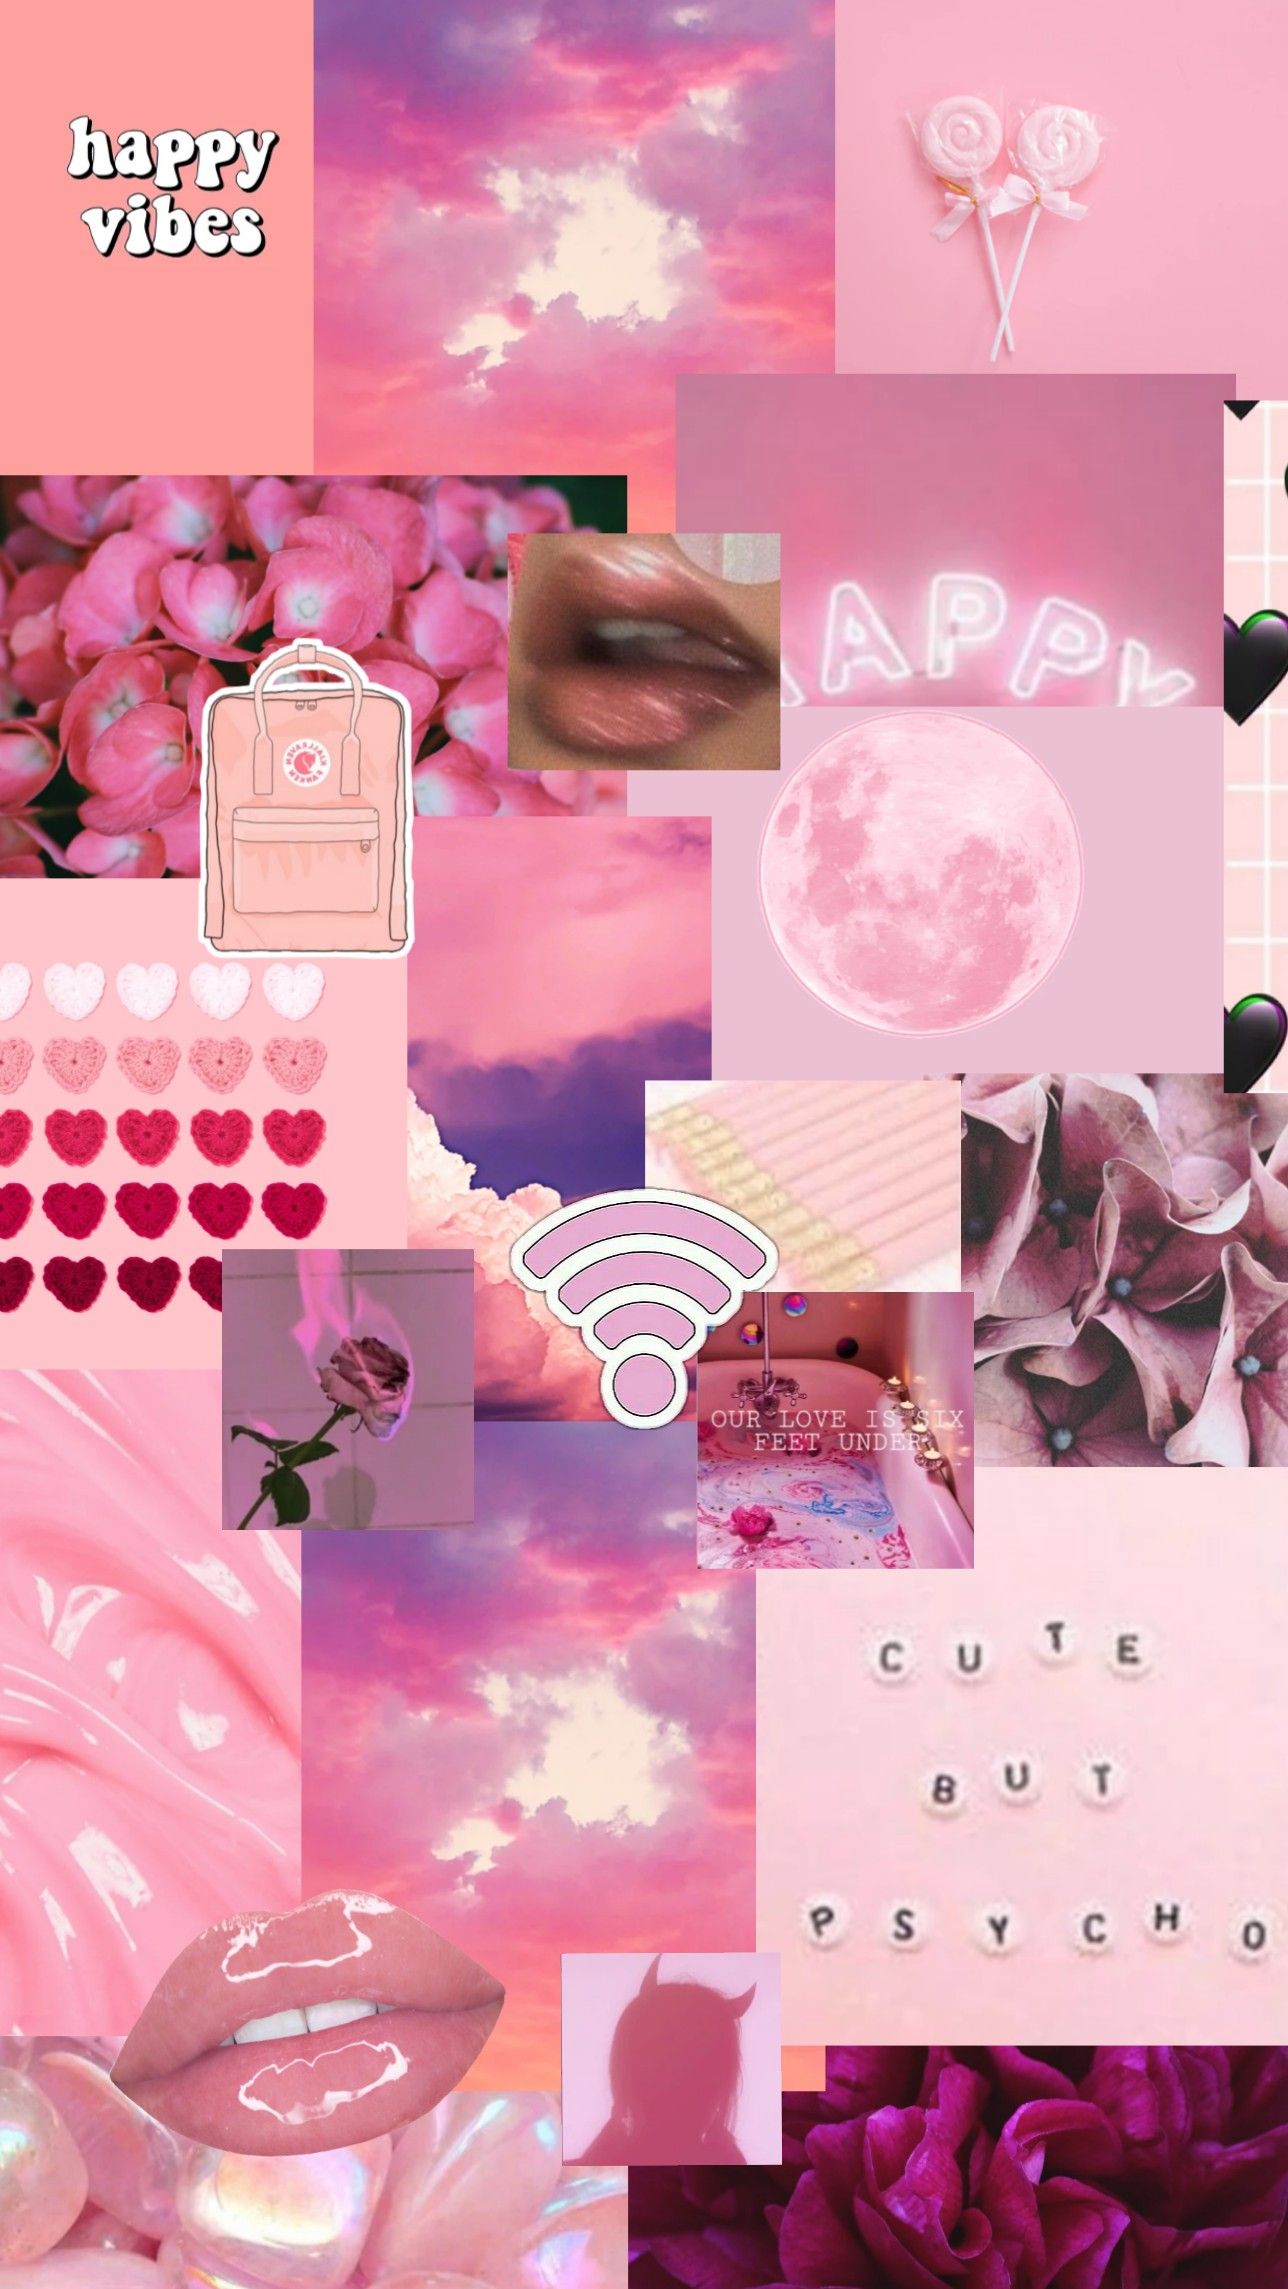 Aesthetic Pink Collage Wallpaper. Pink wallpaper iphone, iPhone wallpaper tumblr aesthetic, Aesthetic iphone wallpaper